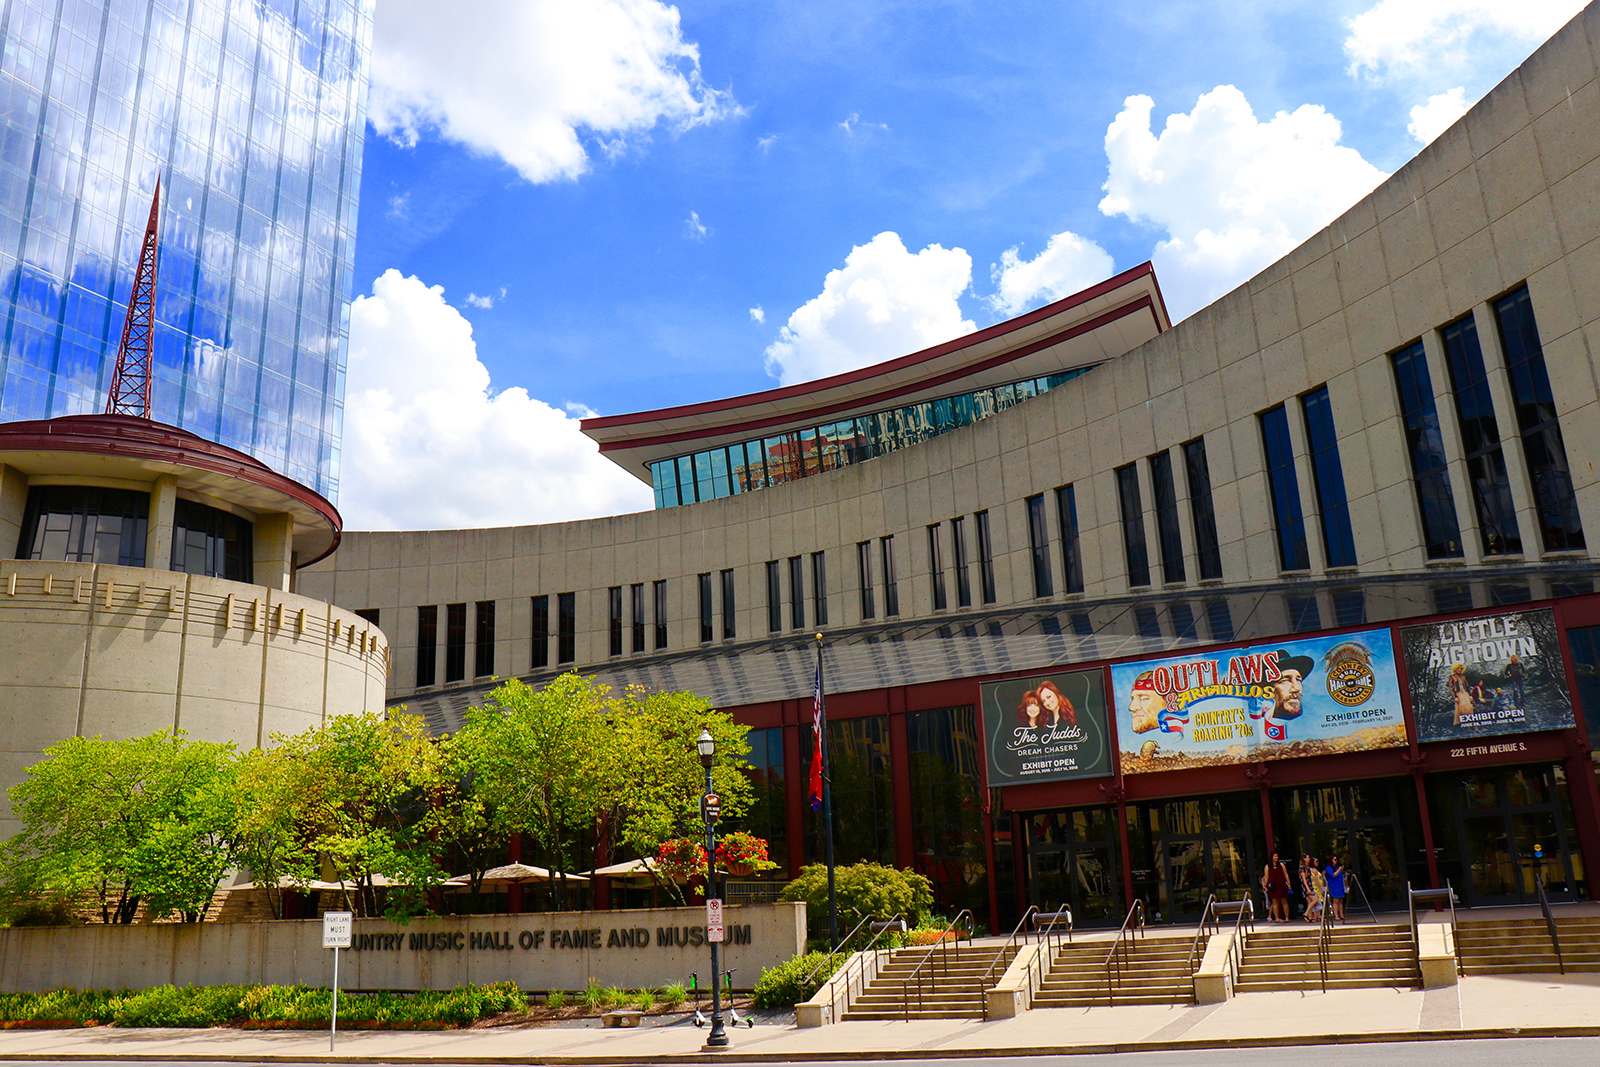 photo of Country Music Hall of Fame building